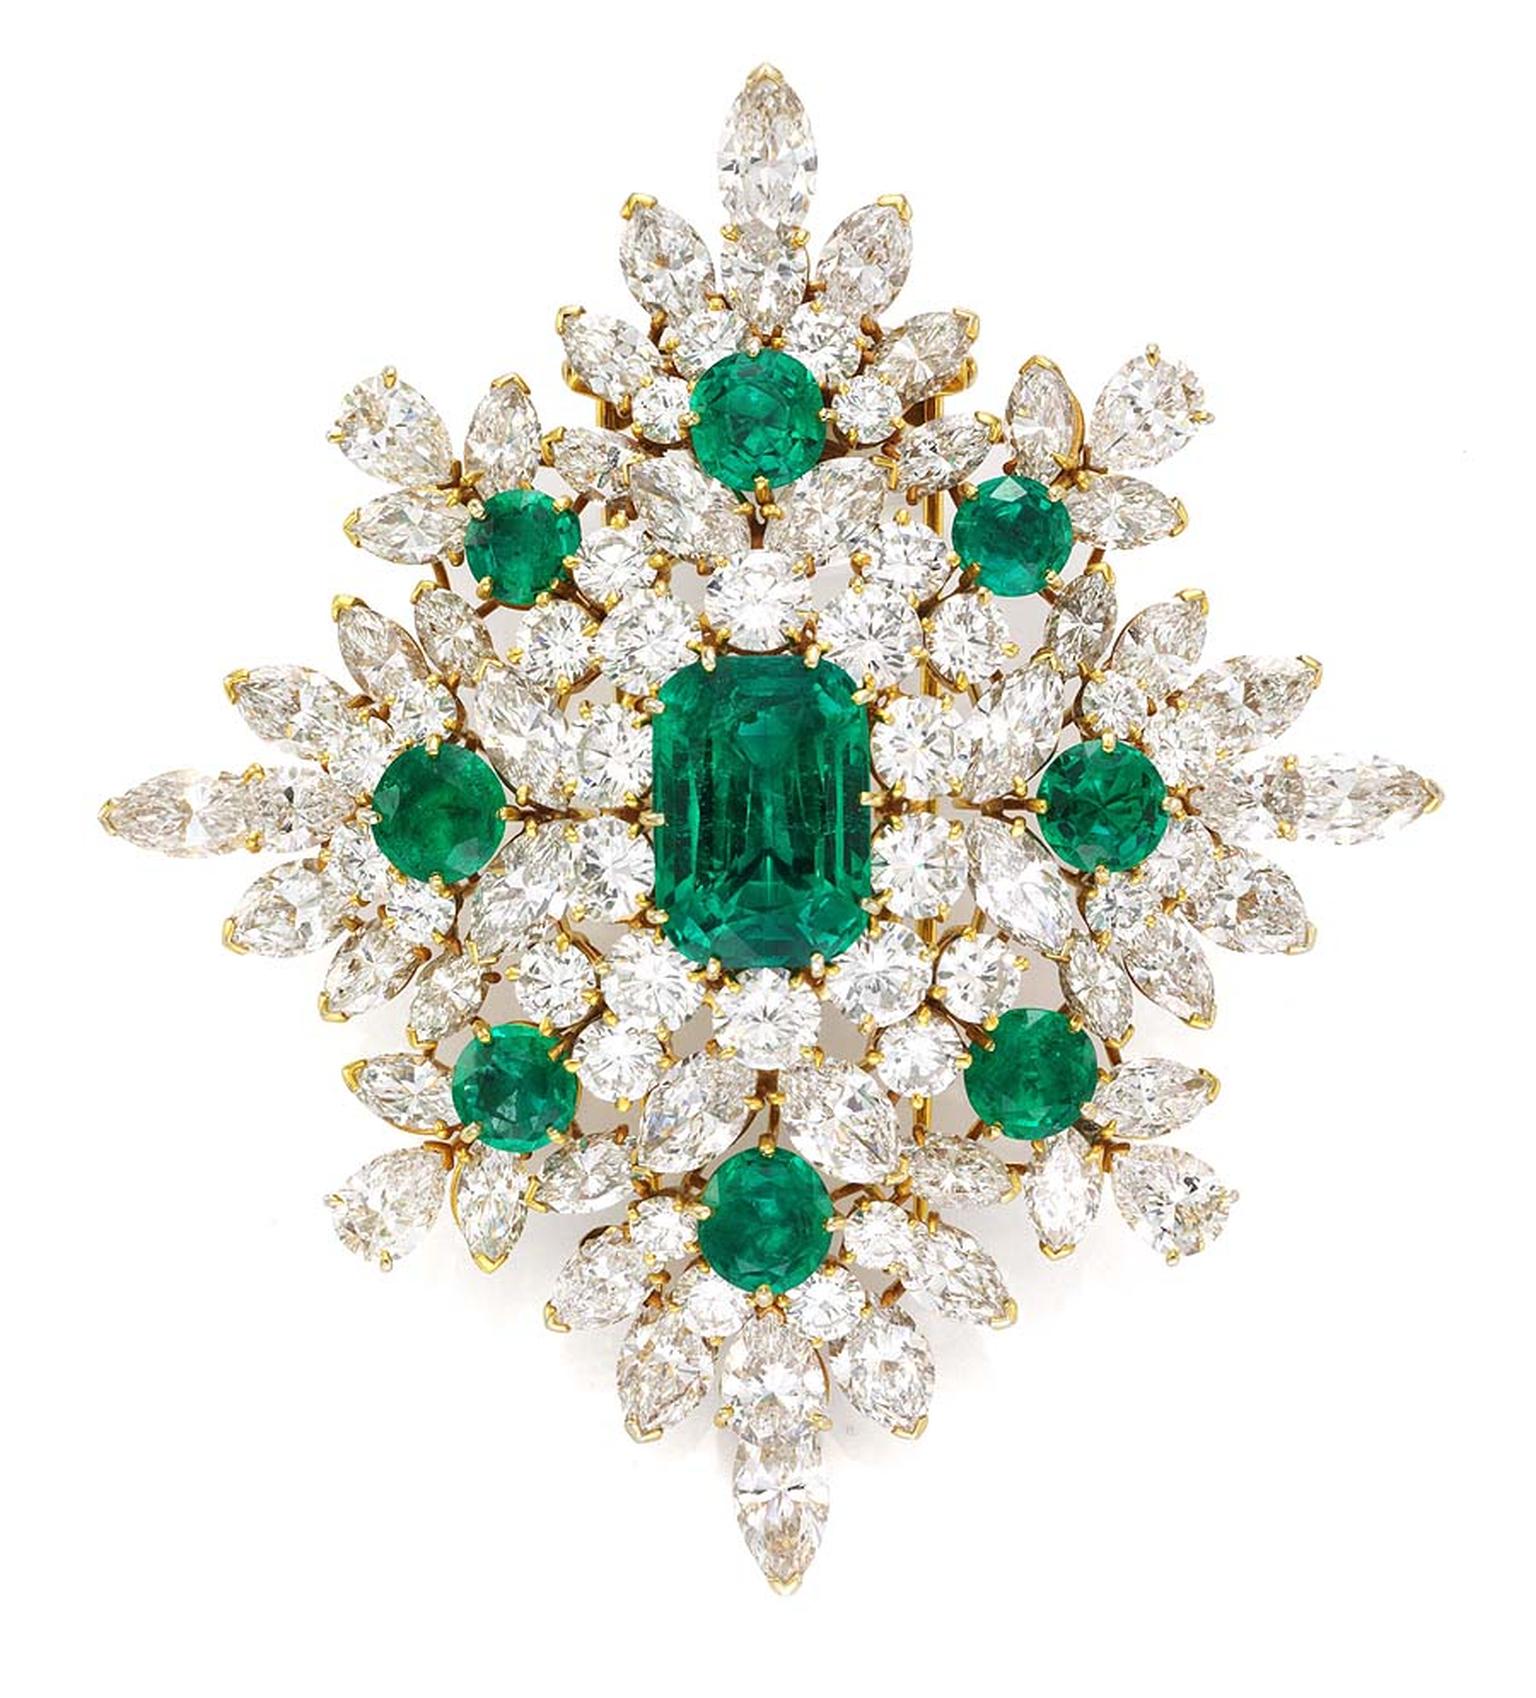 Van Cleefs & Arpels' magnificent emerald and diamond brooch (1967), Simon Teakle, Connecticut, was one of the vintage emerald jewels on display at Fine Art Asia 2013.